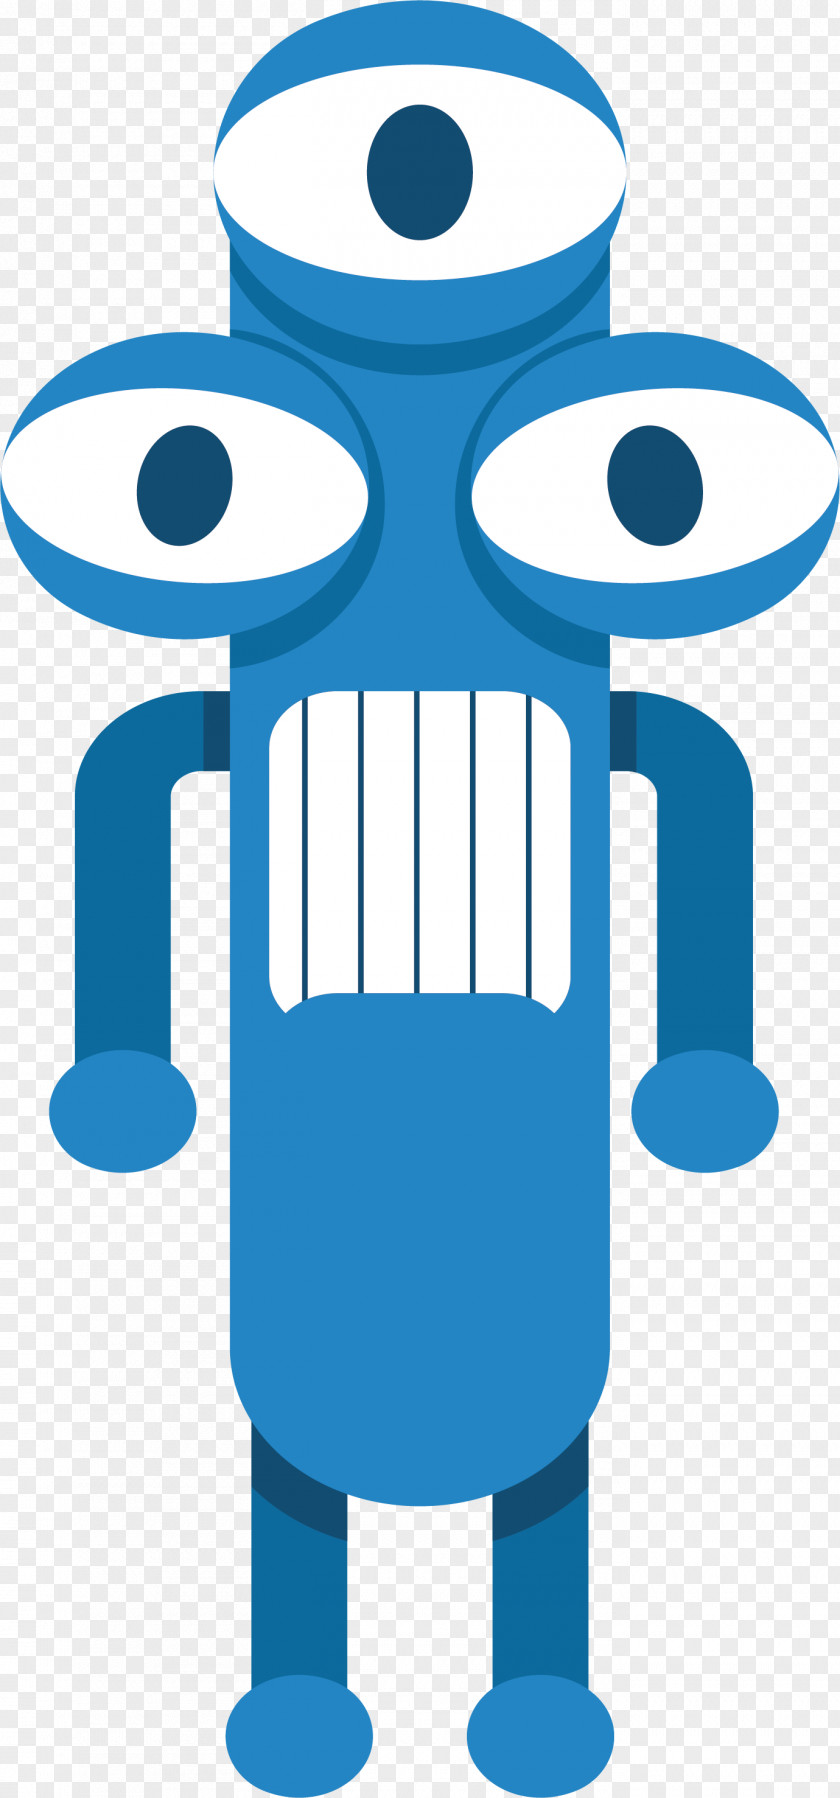 The Three Eyed Monster In Blue Clip Art PNG